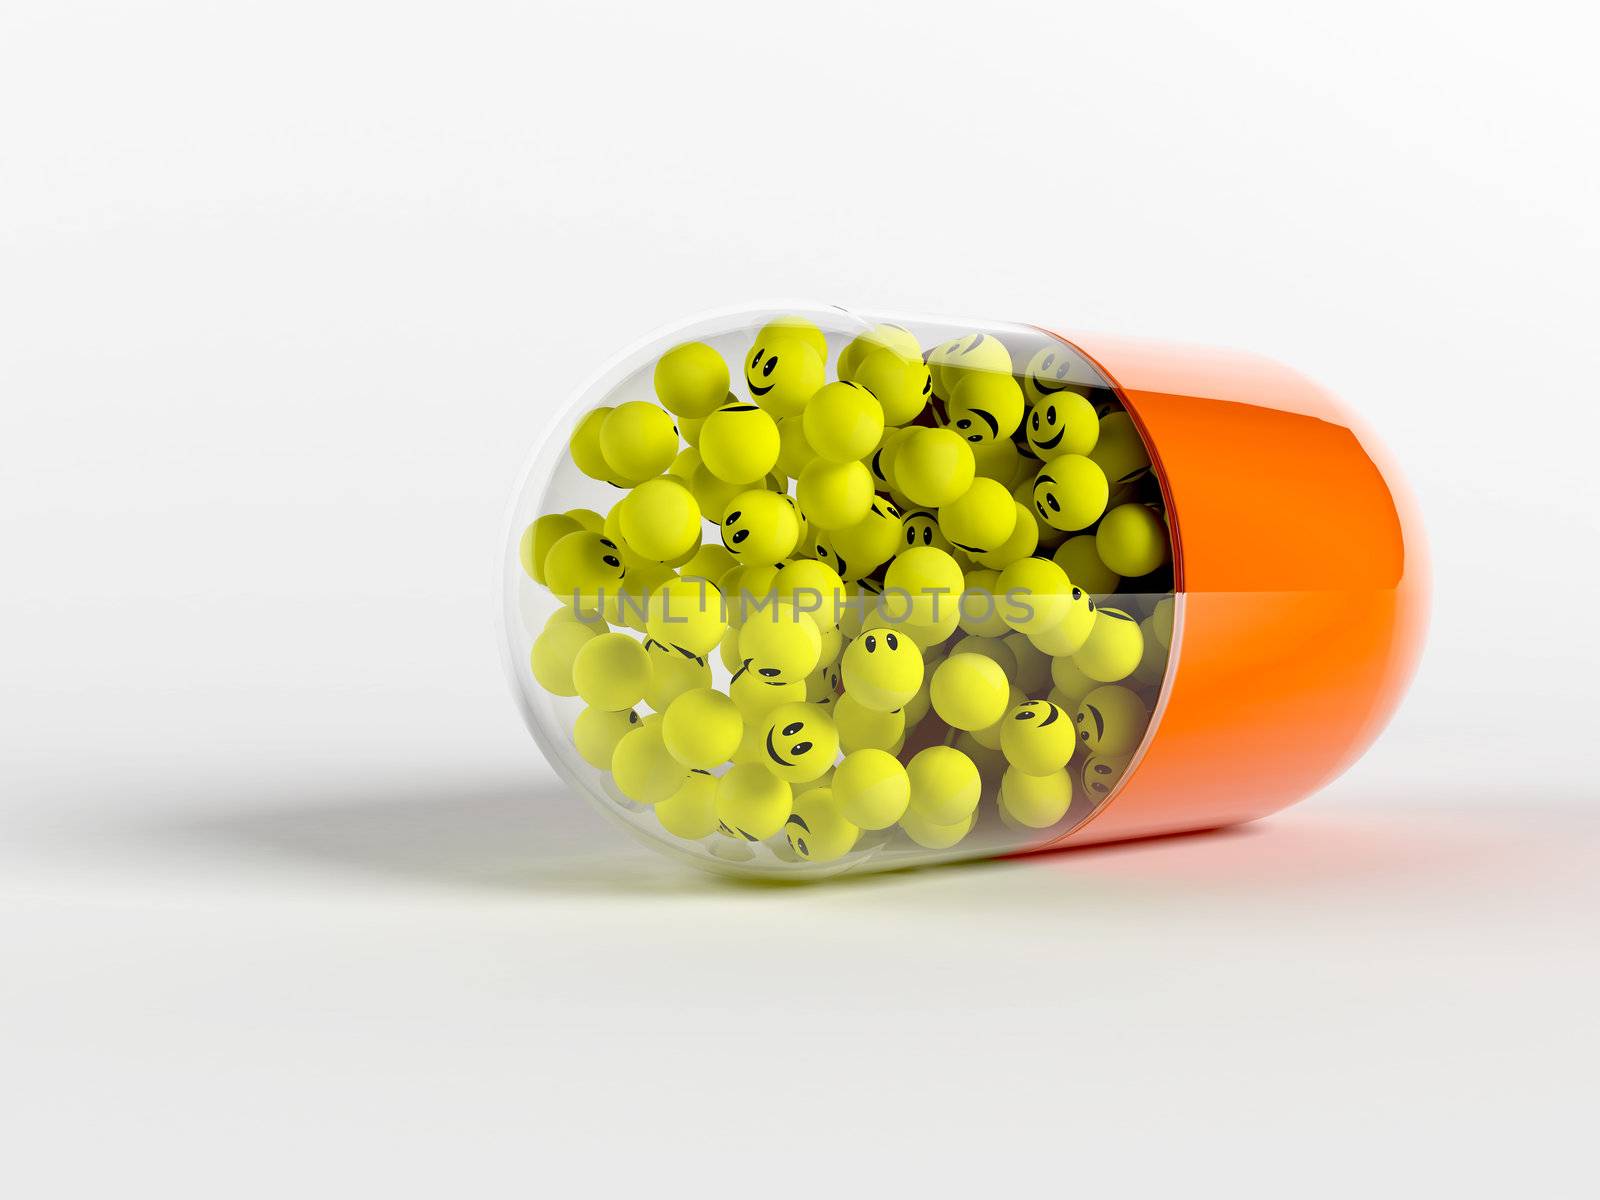 a funny view of a medical drug